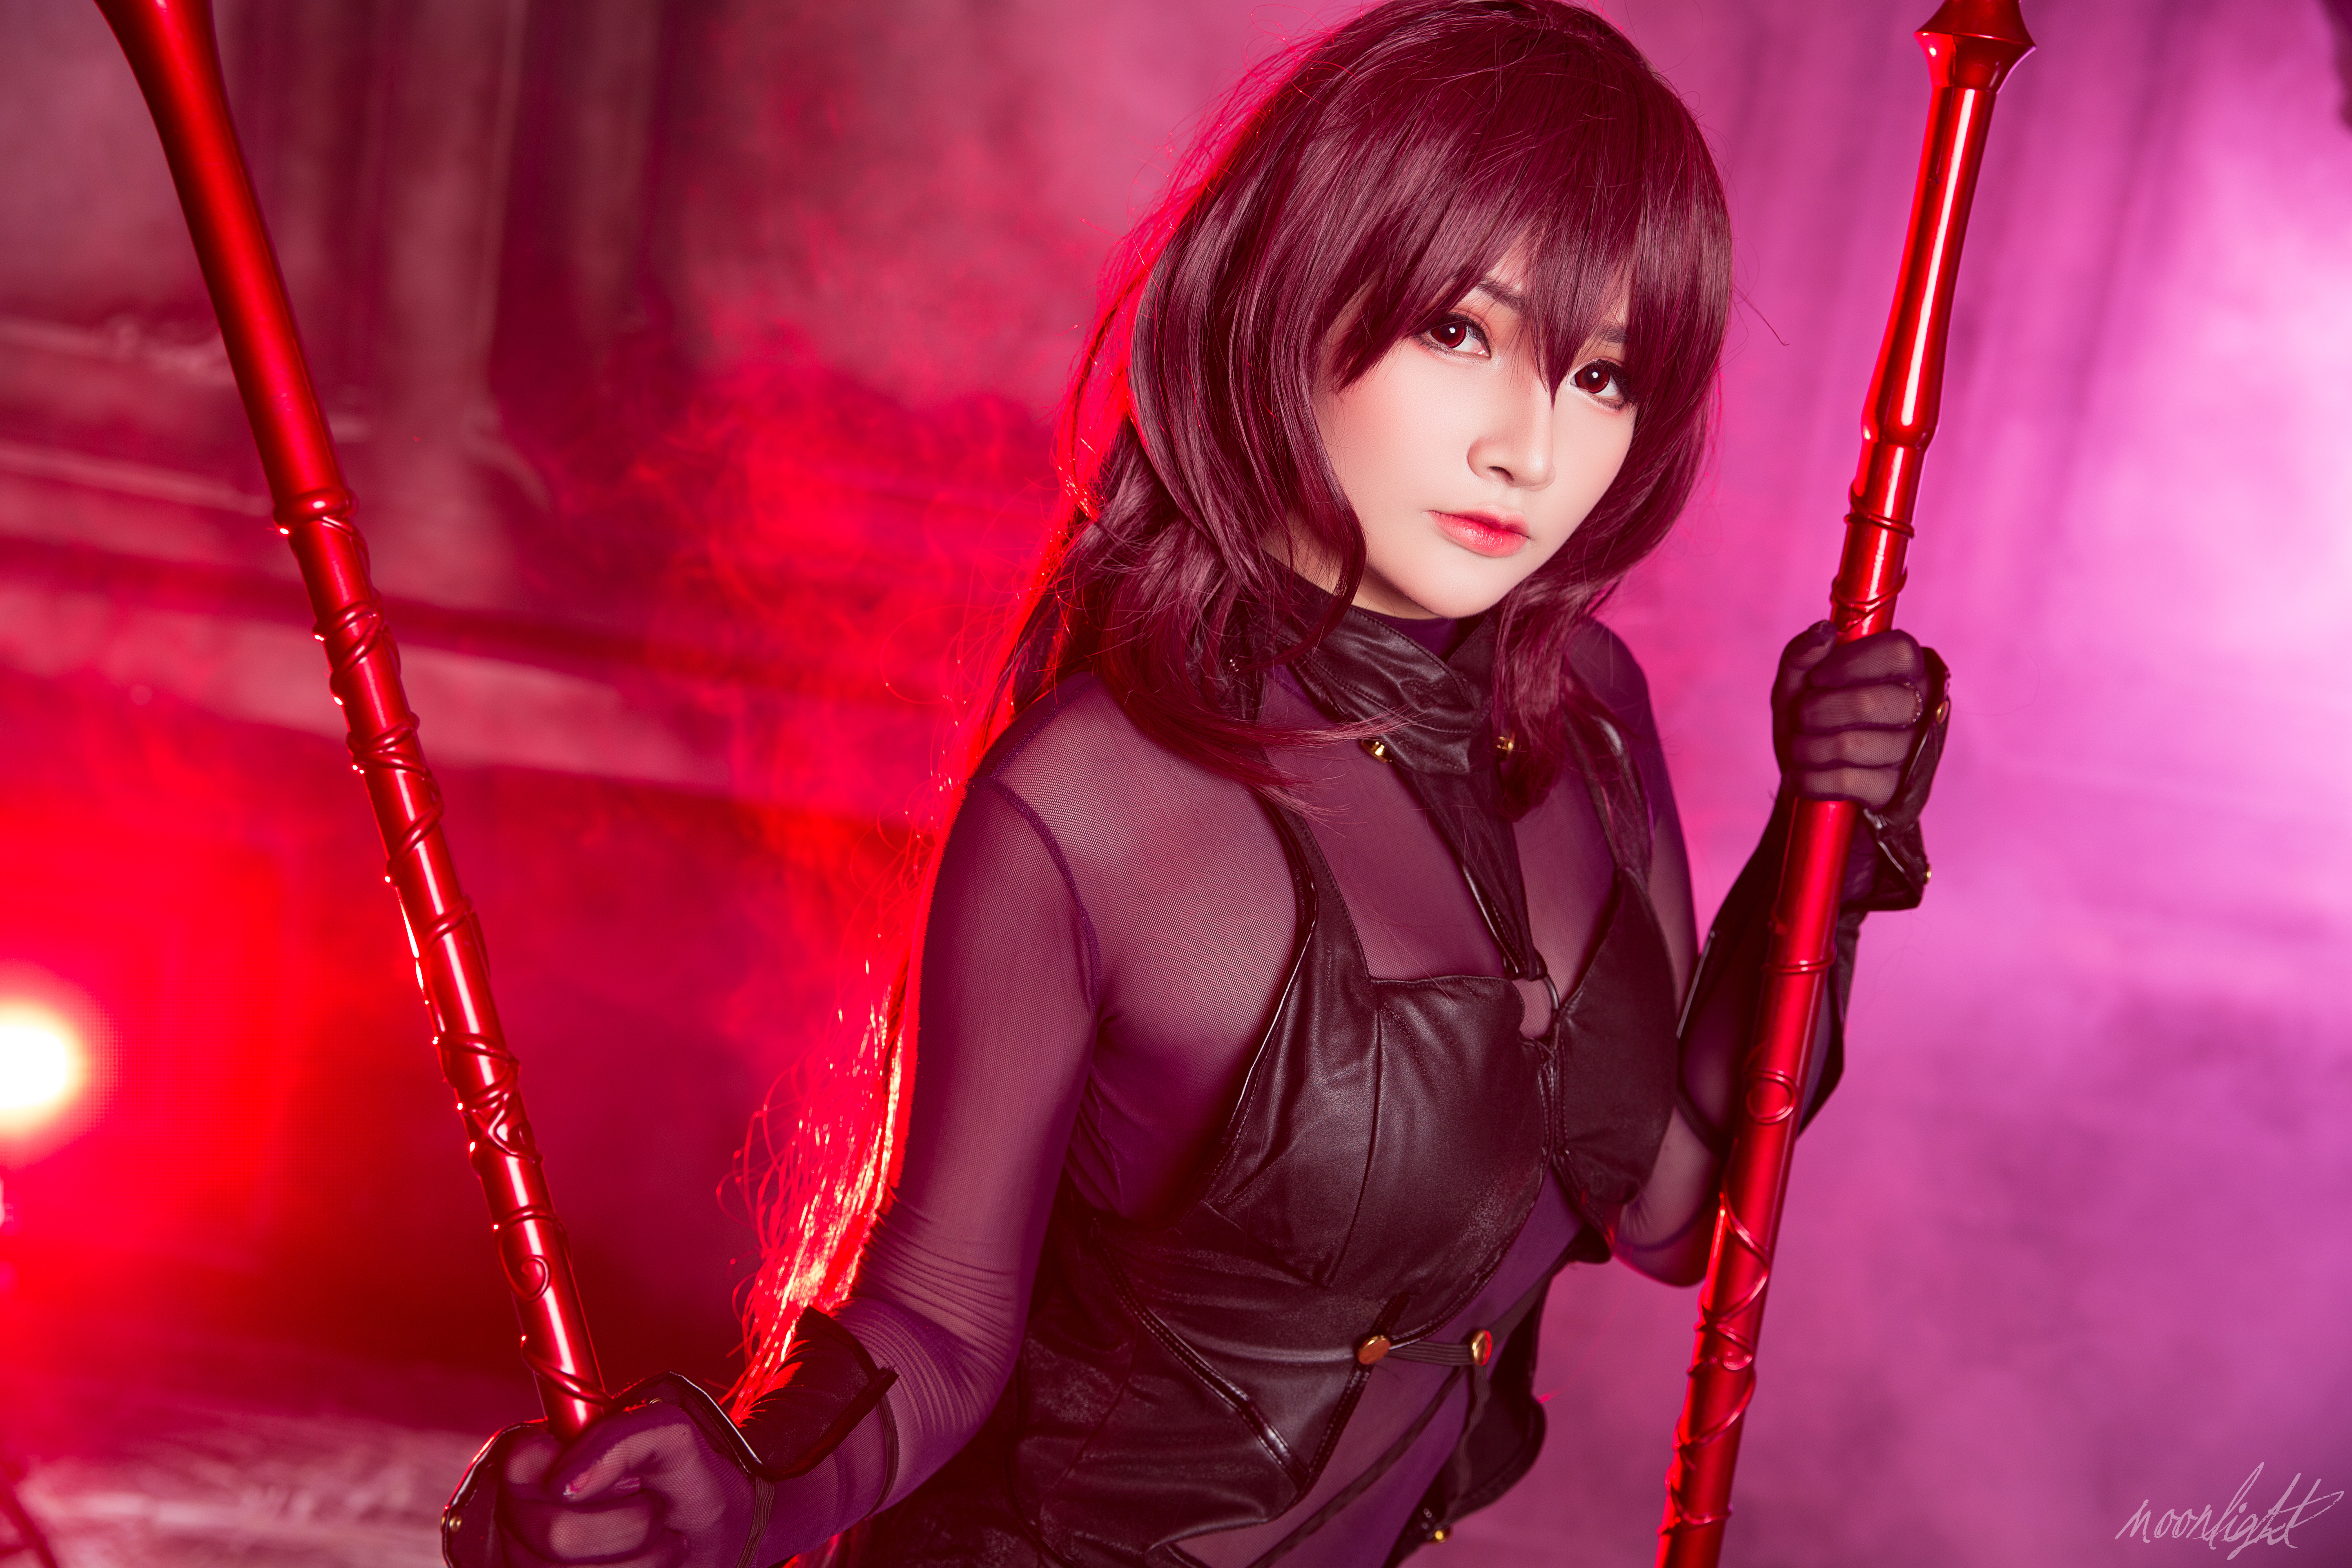 MiMi Chan Women Model Asian Scathach Fate Grand Order Lancer Fate Grand Order Scathach Fate Grand Or 5760x3840